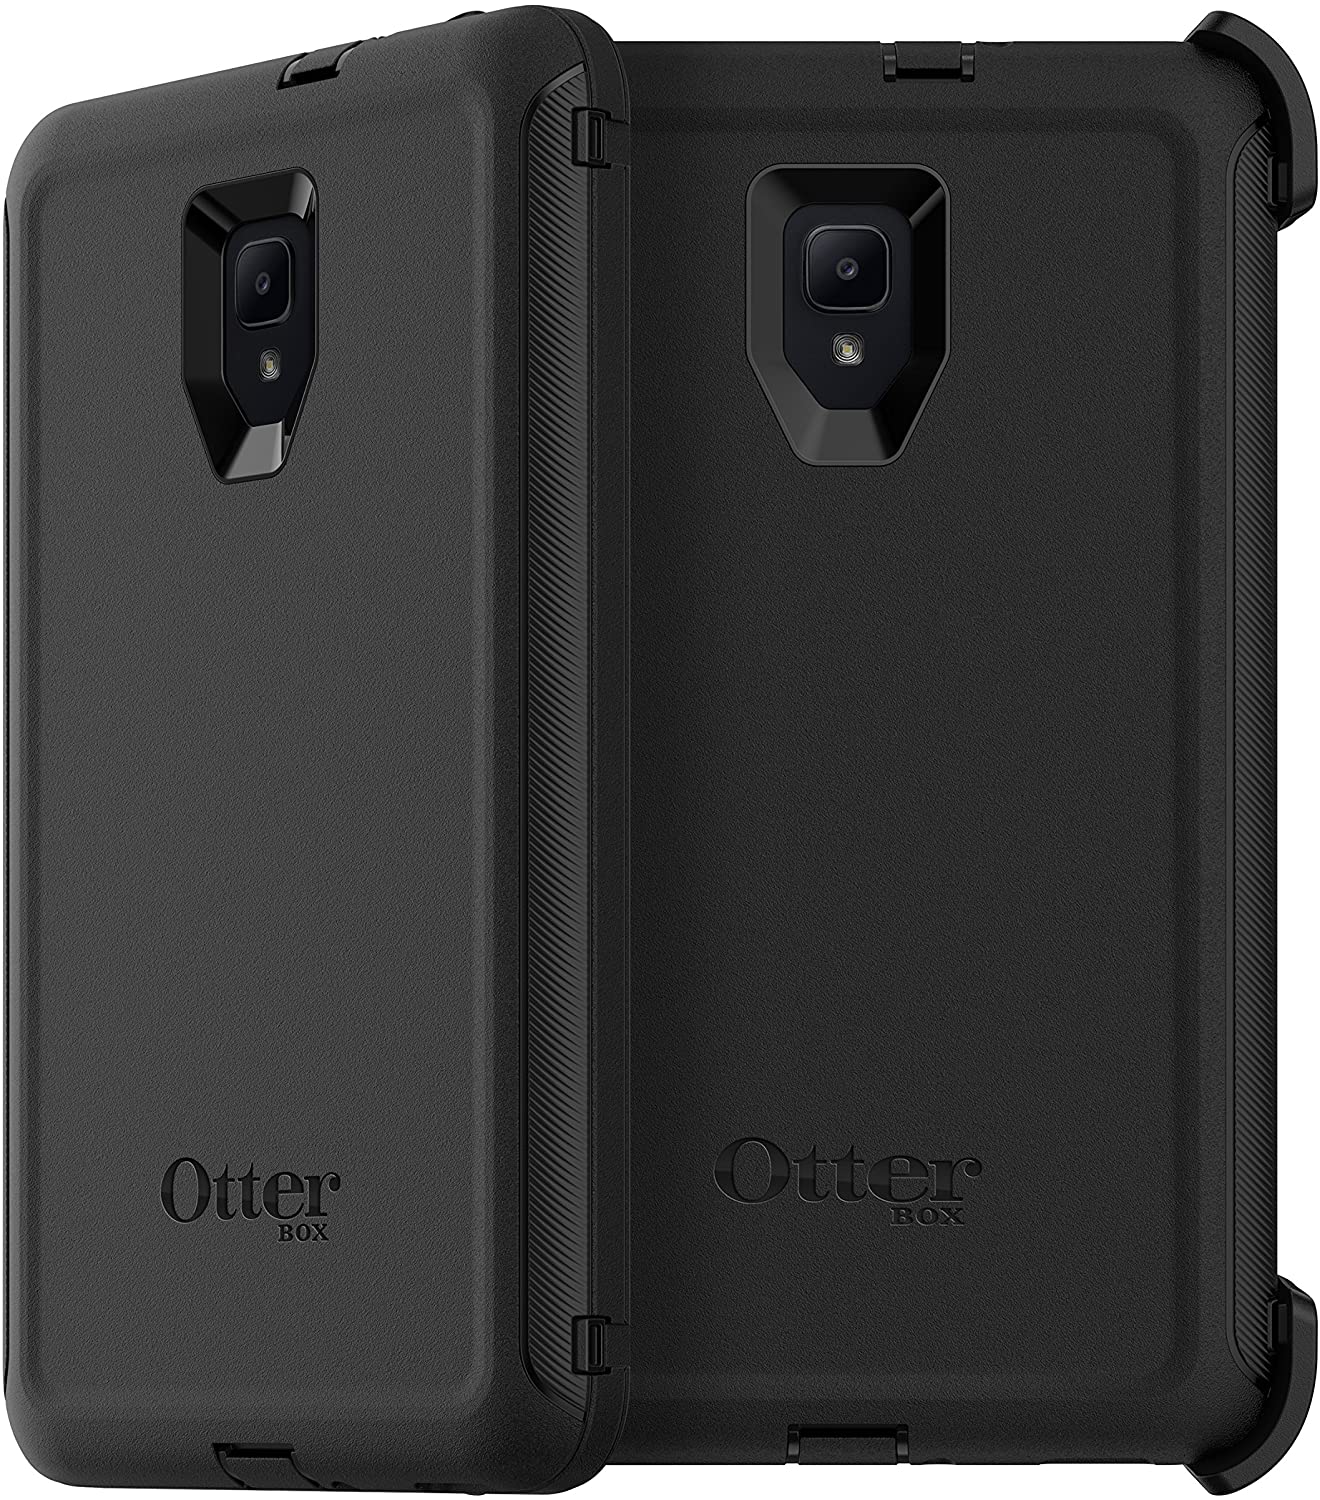 OtterBox DEFENDER SERIES Case &amp; Stand for Samsung Galaxy Tab A 8.0 - Black (Certified Refurbished)